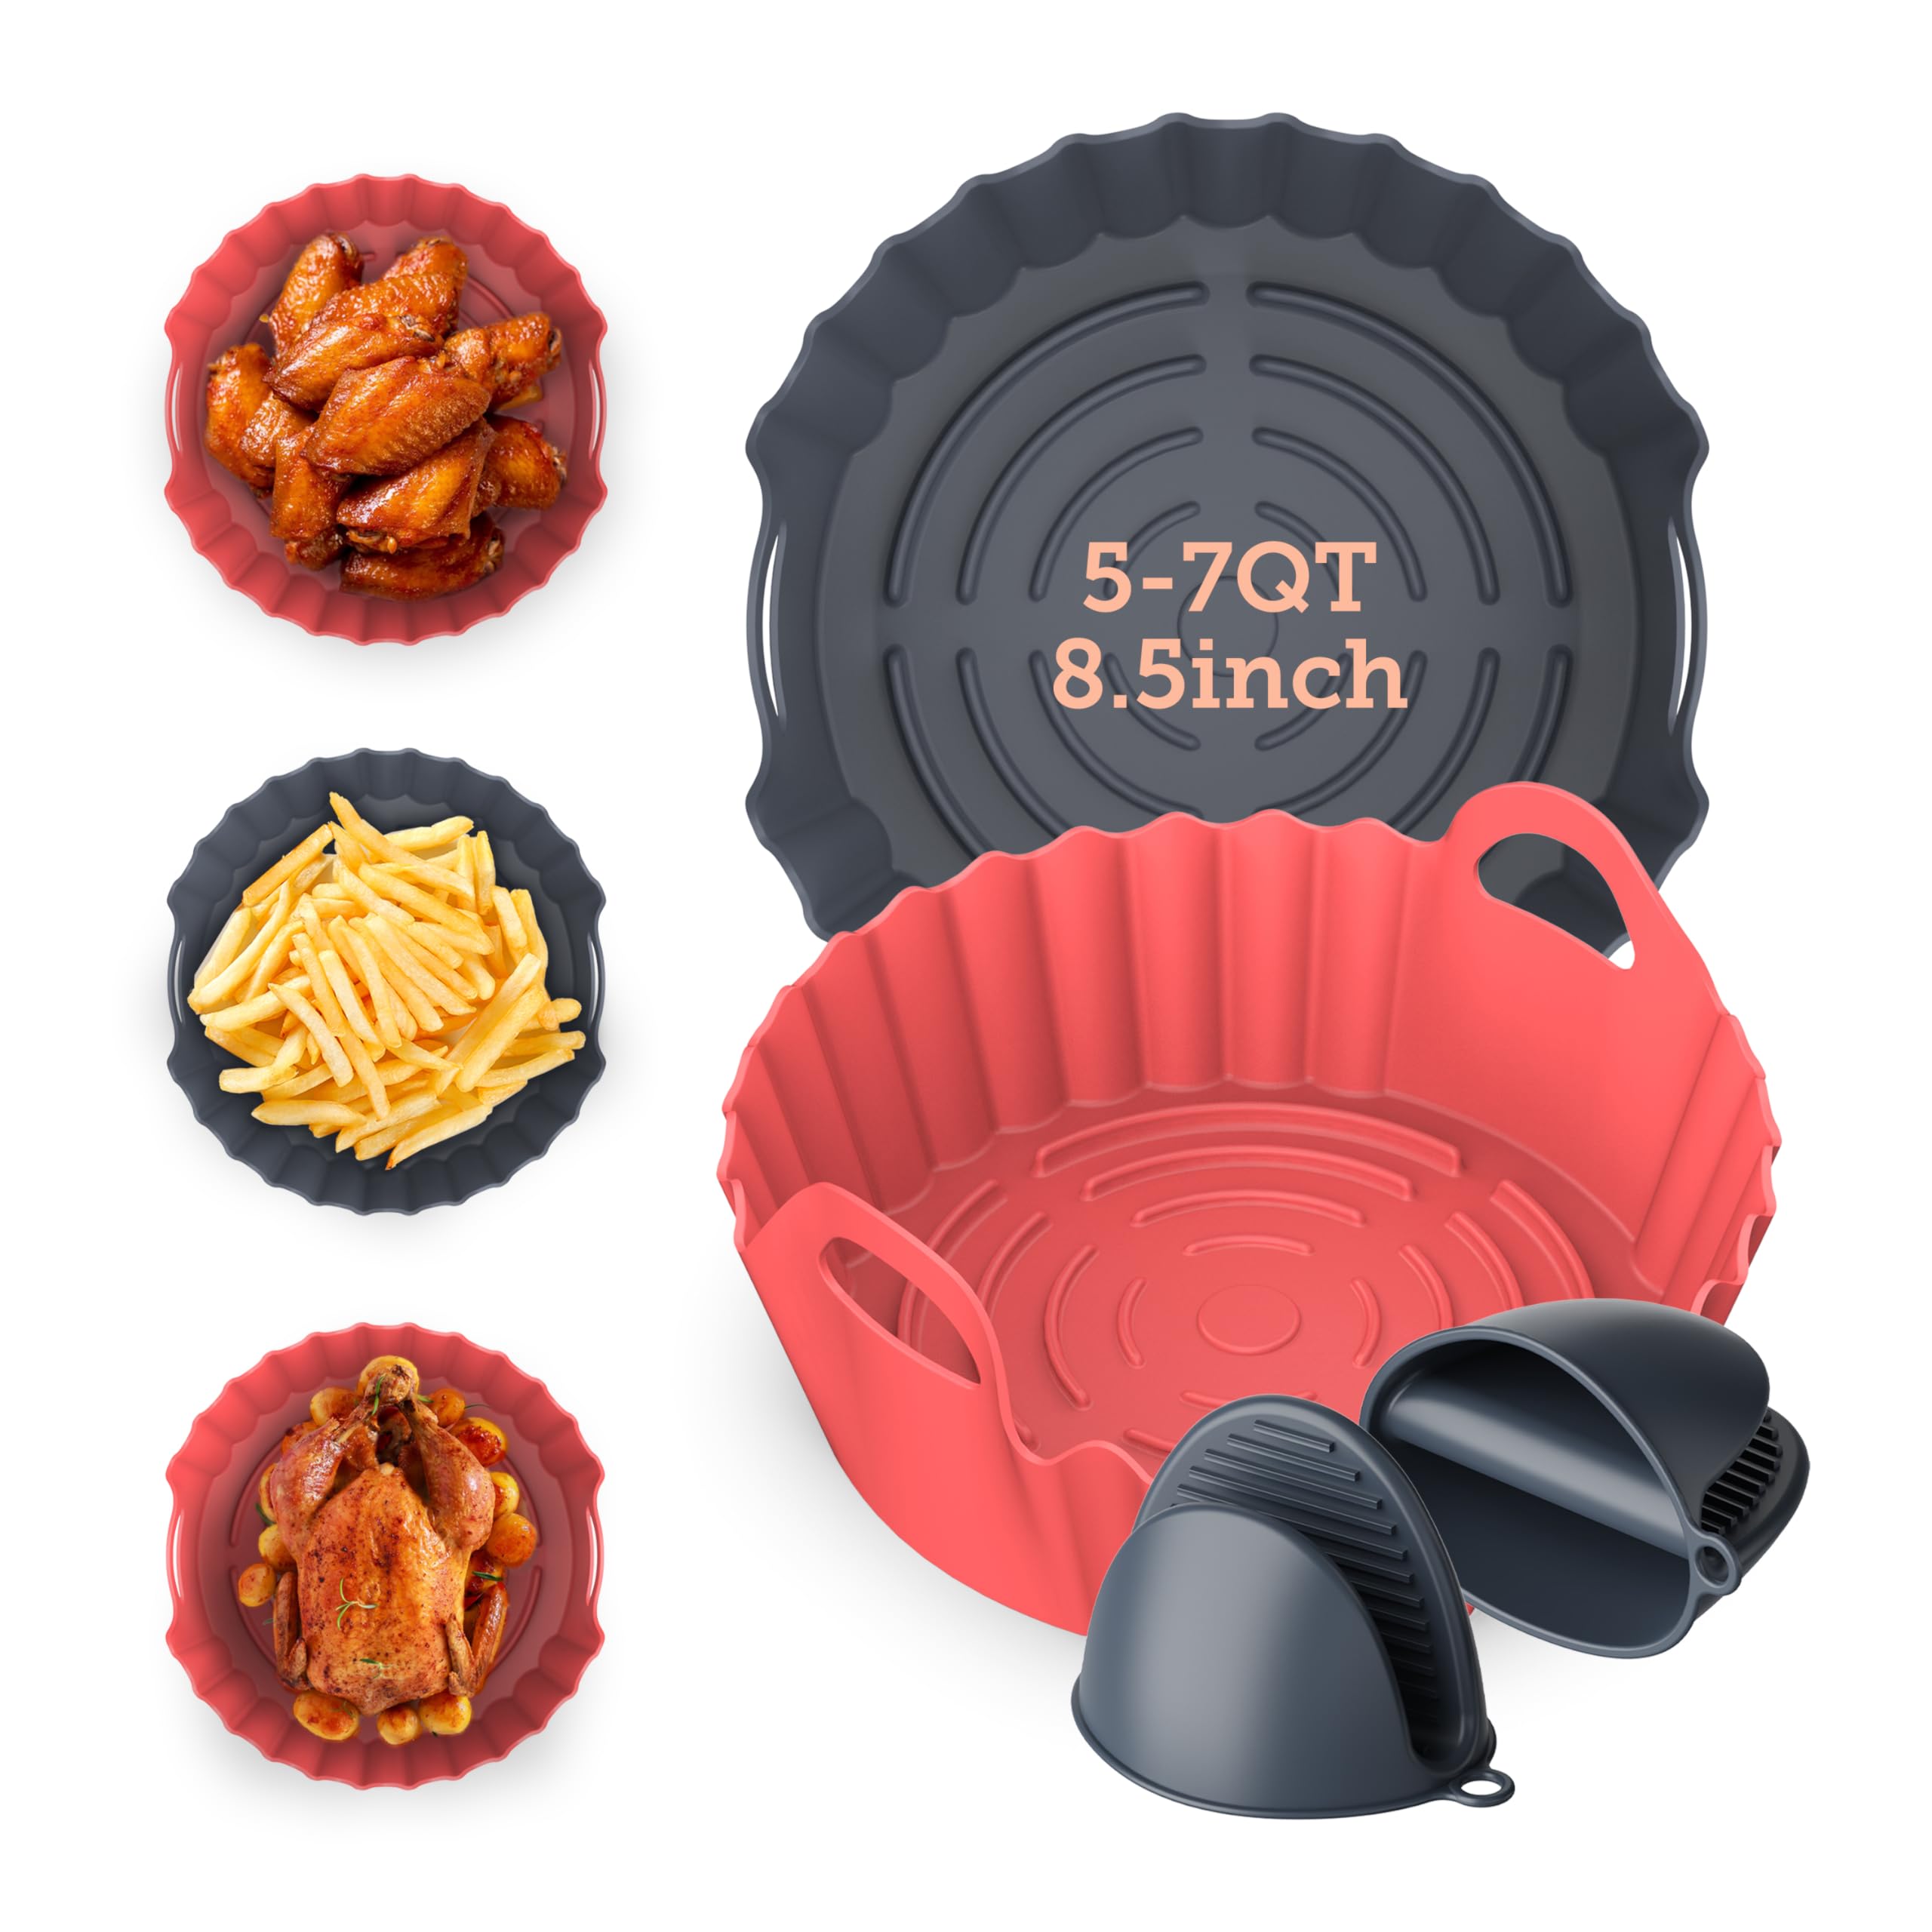 COSORI Air Fryer Silicone Liners for 5-7 Qt, 8.5 Inch Reusable Basket, Certified Food Grade Accessories, Resistant up to 450°F, Thickened & Durable​, Non-stick Dishwasher Safe, Gloves Included, 2 Pcs